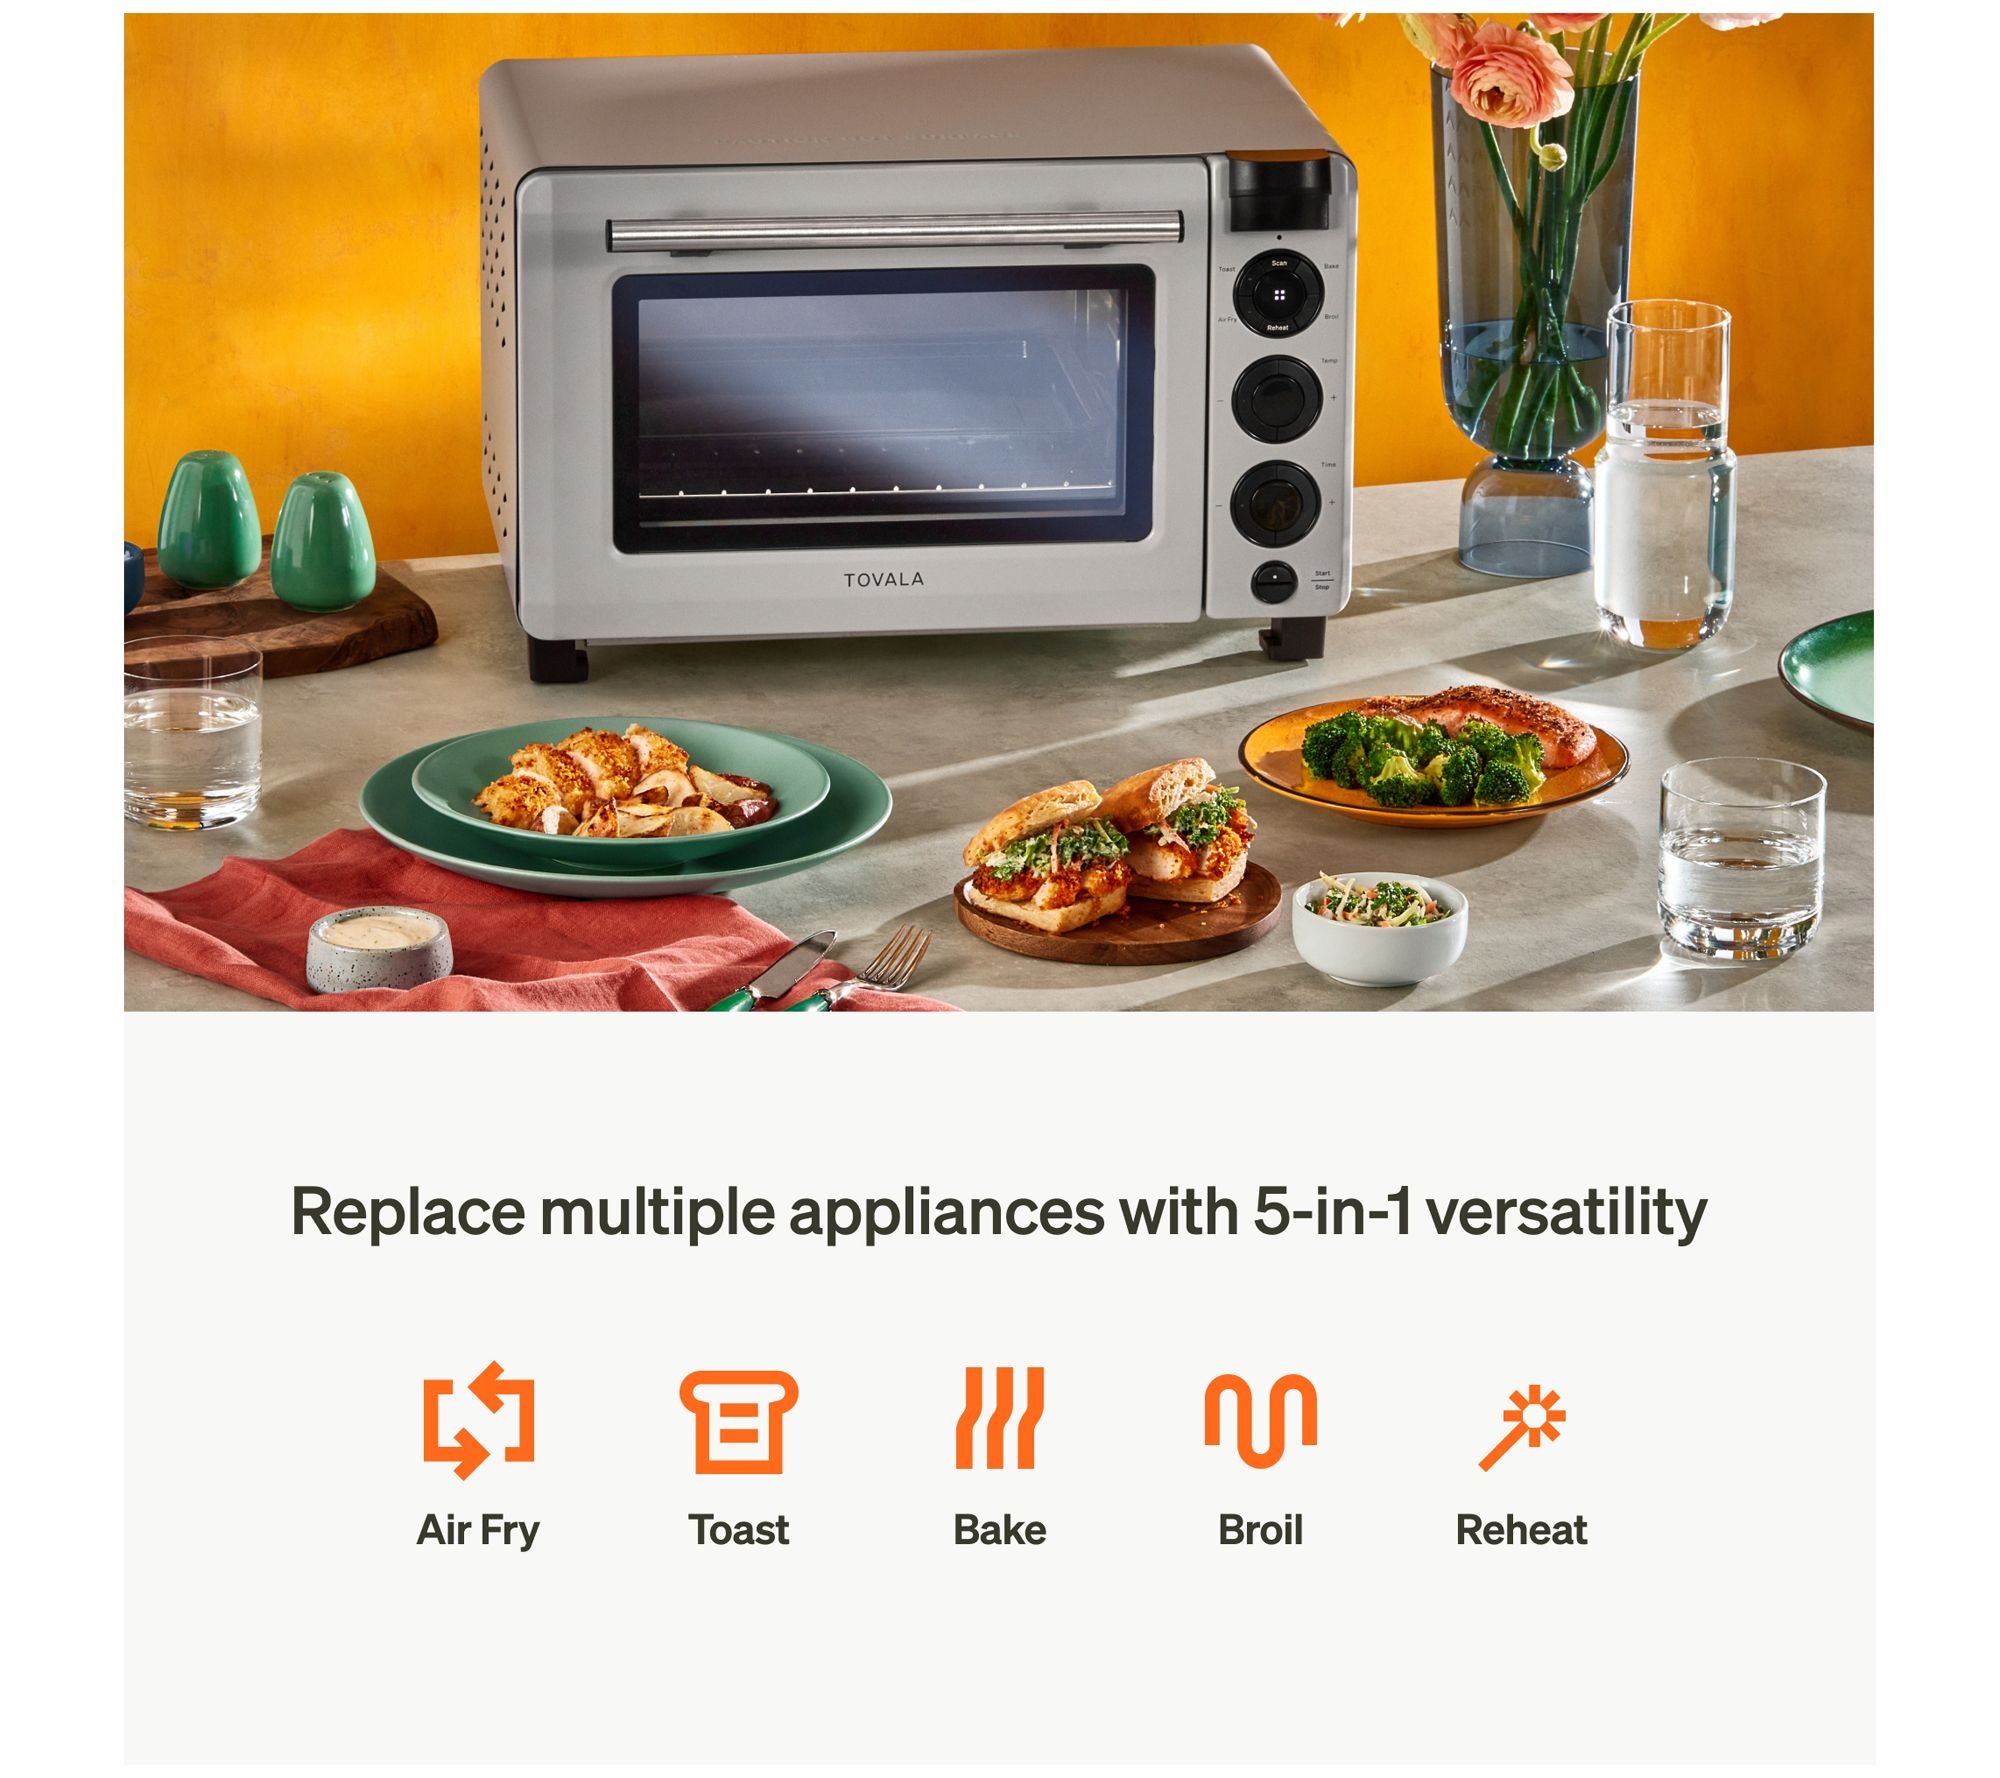 Meal delivery really gets the Tovala Smart Oven cooking - CNET